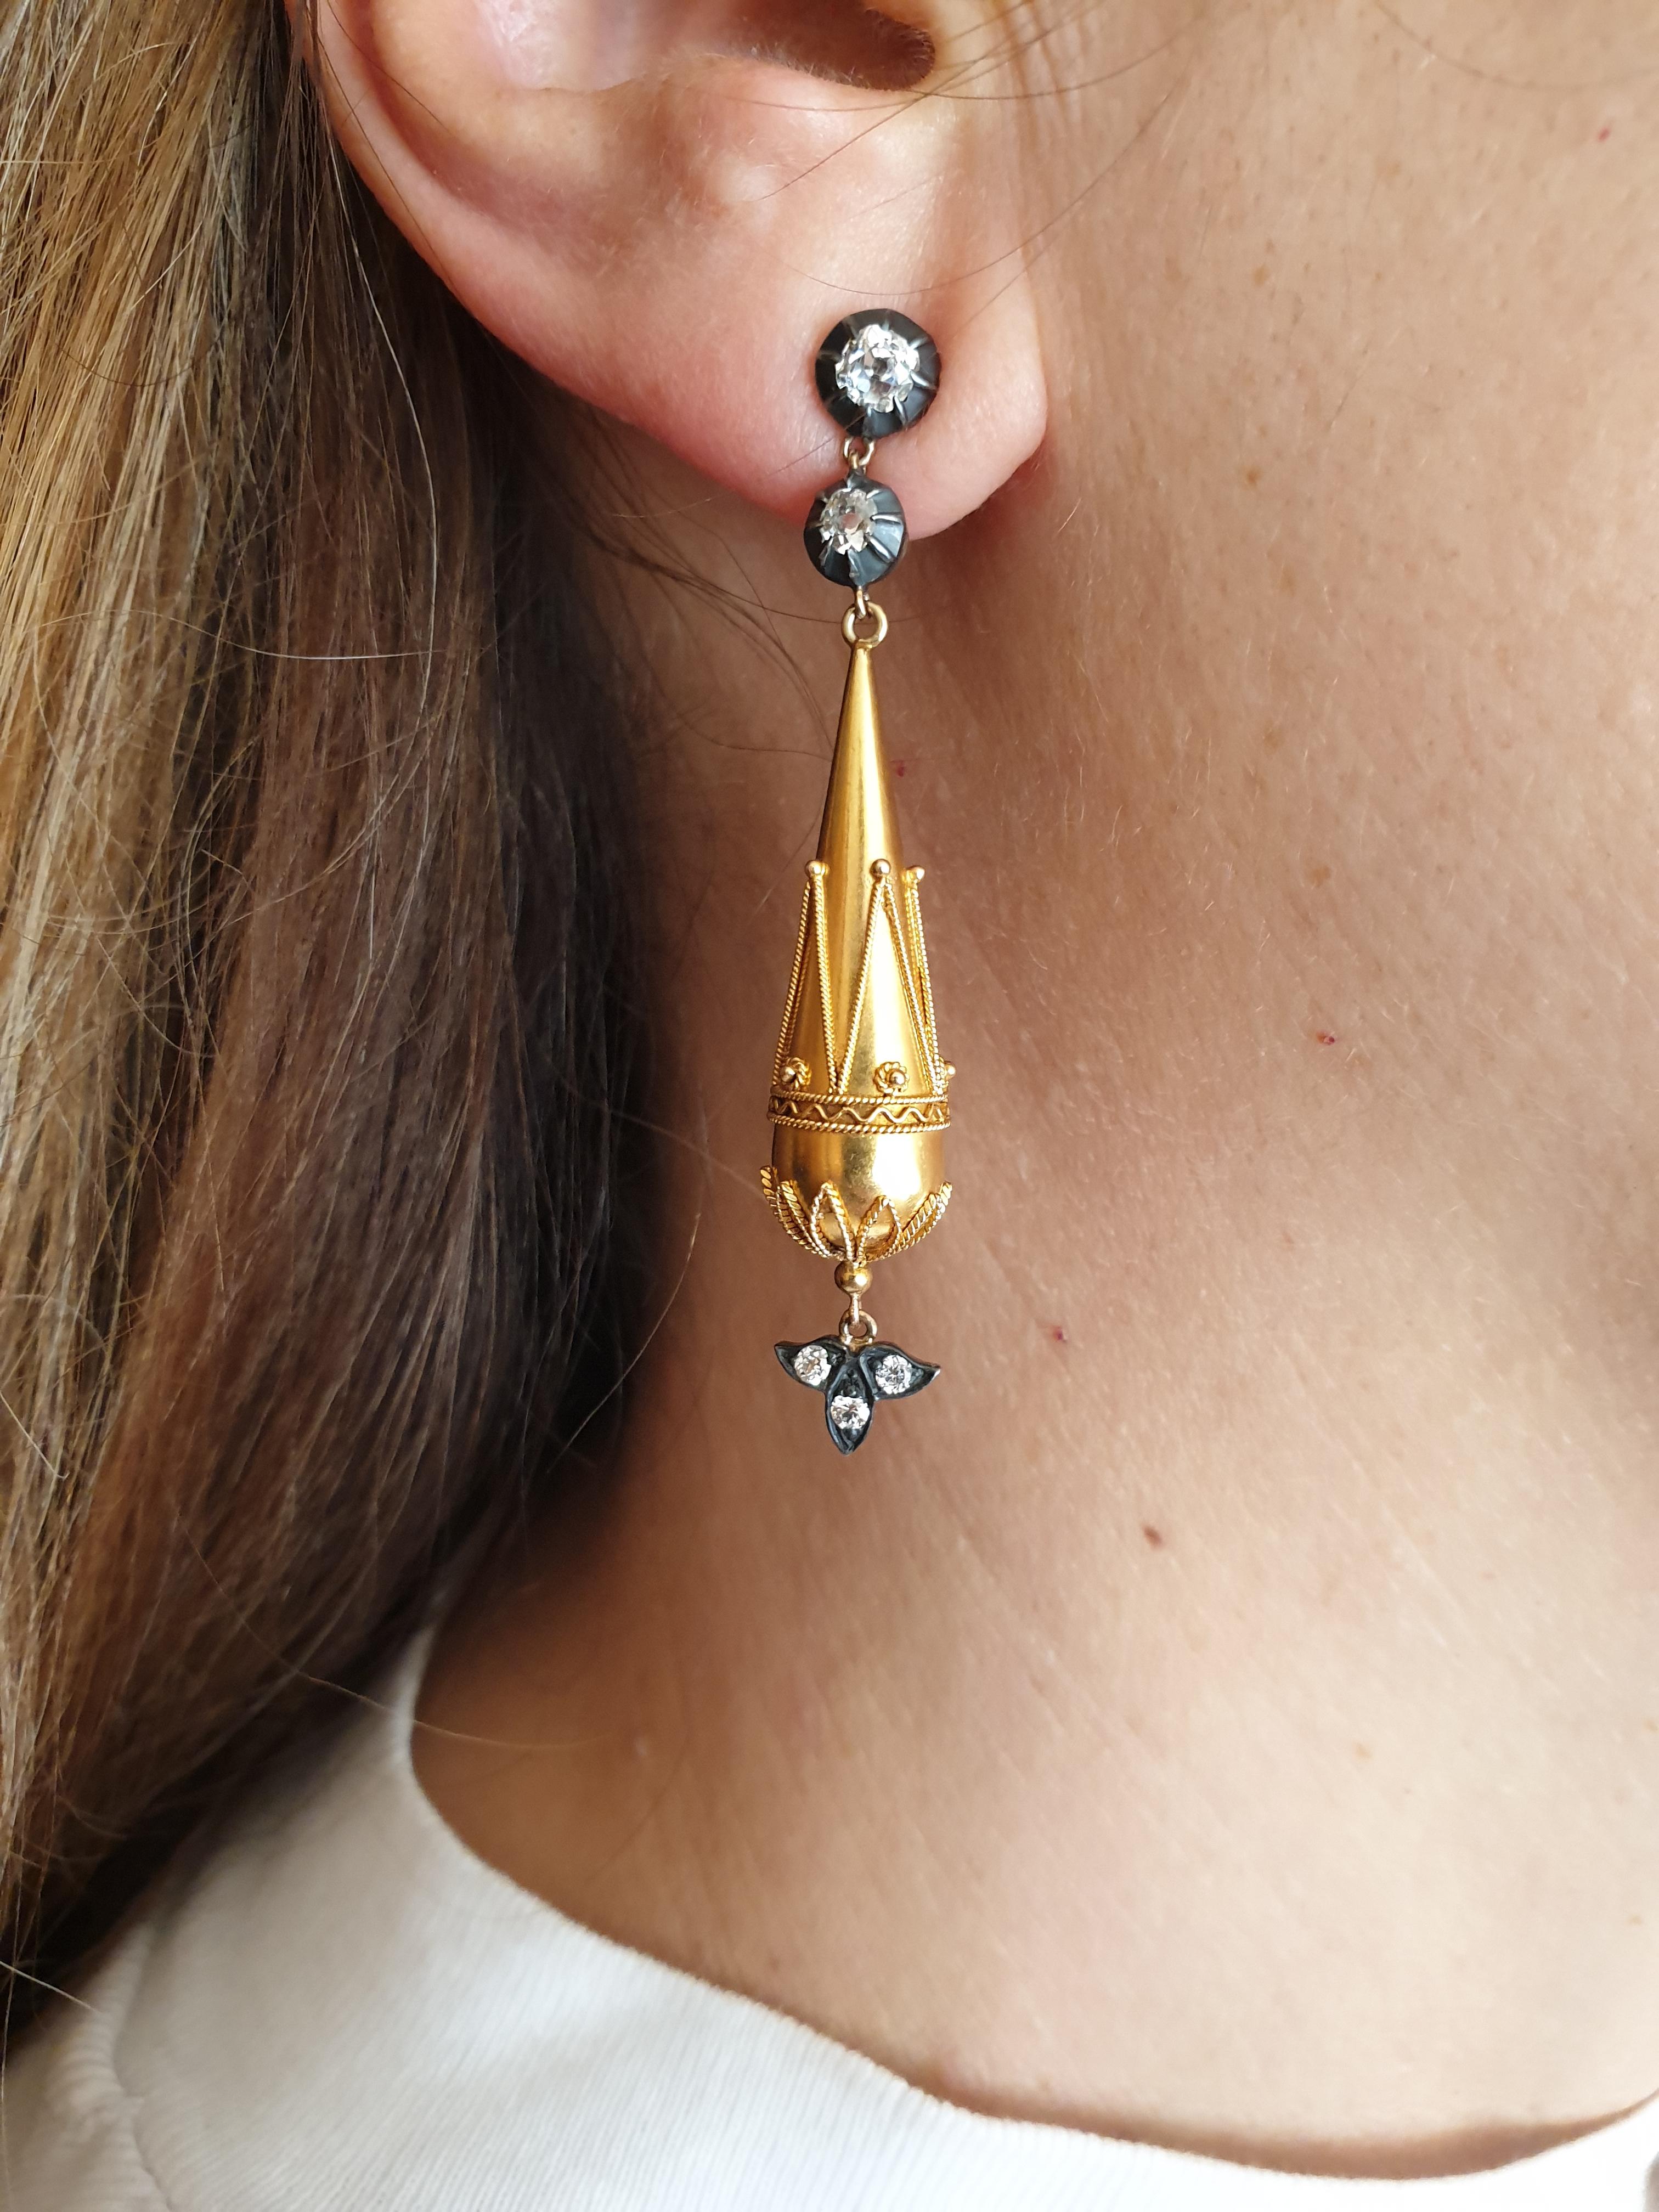 Victorian gold earrings recently mounted with old cut diamonds in a silver topped gold mounting.